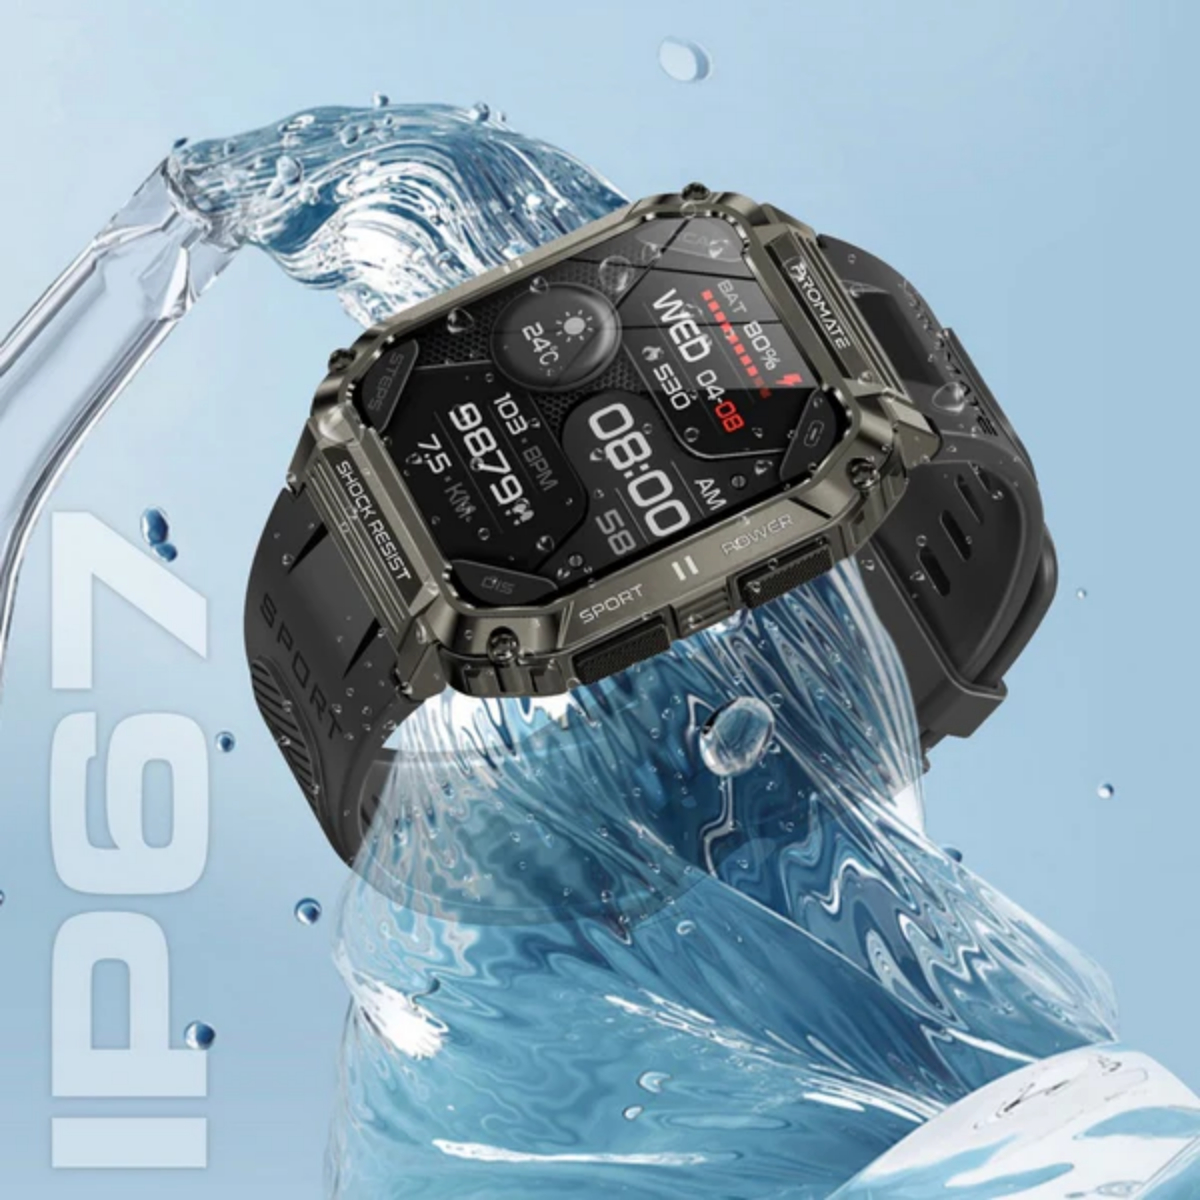 PROMATE Xwatch -S19 is a multifunctional smart sports watch